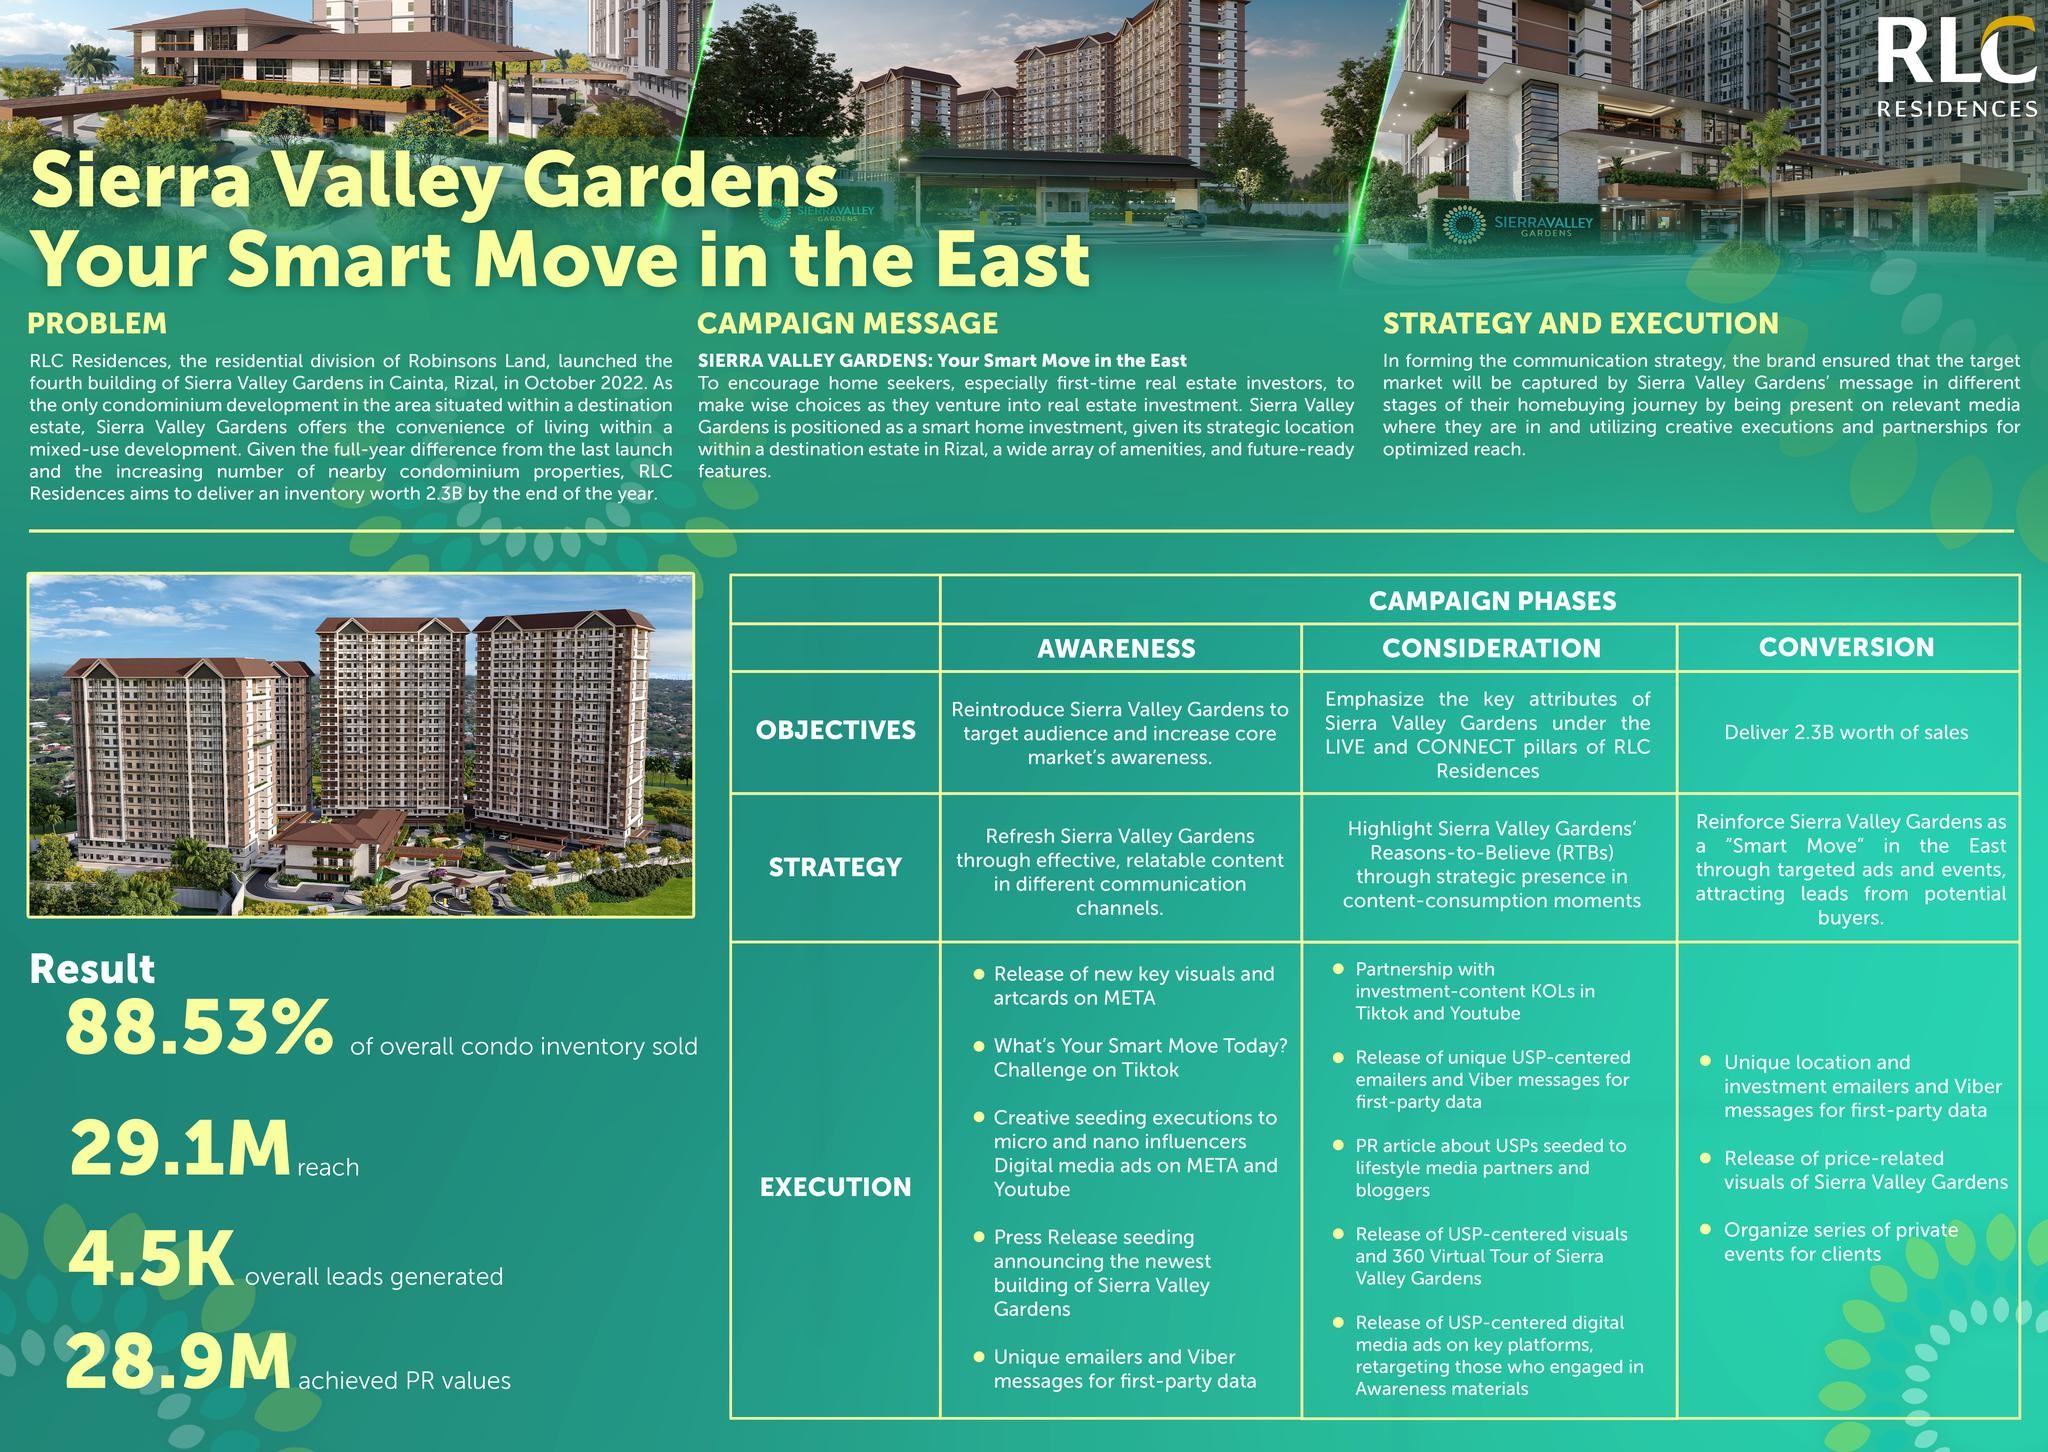 SIERRA VALLEY GARDENS | YOUR SMART MOVE IN THE EAST